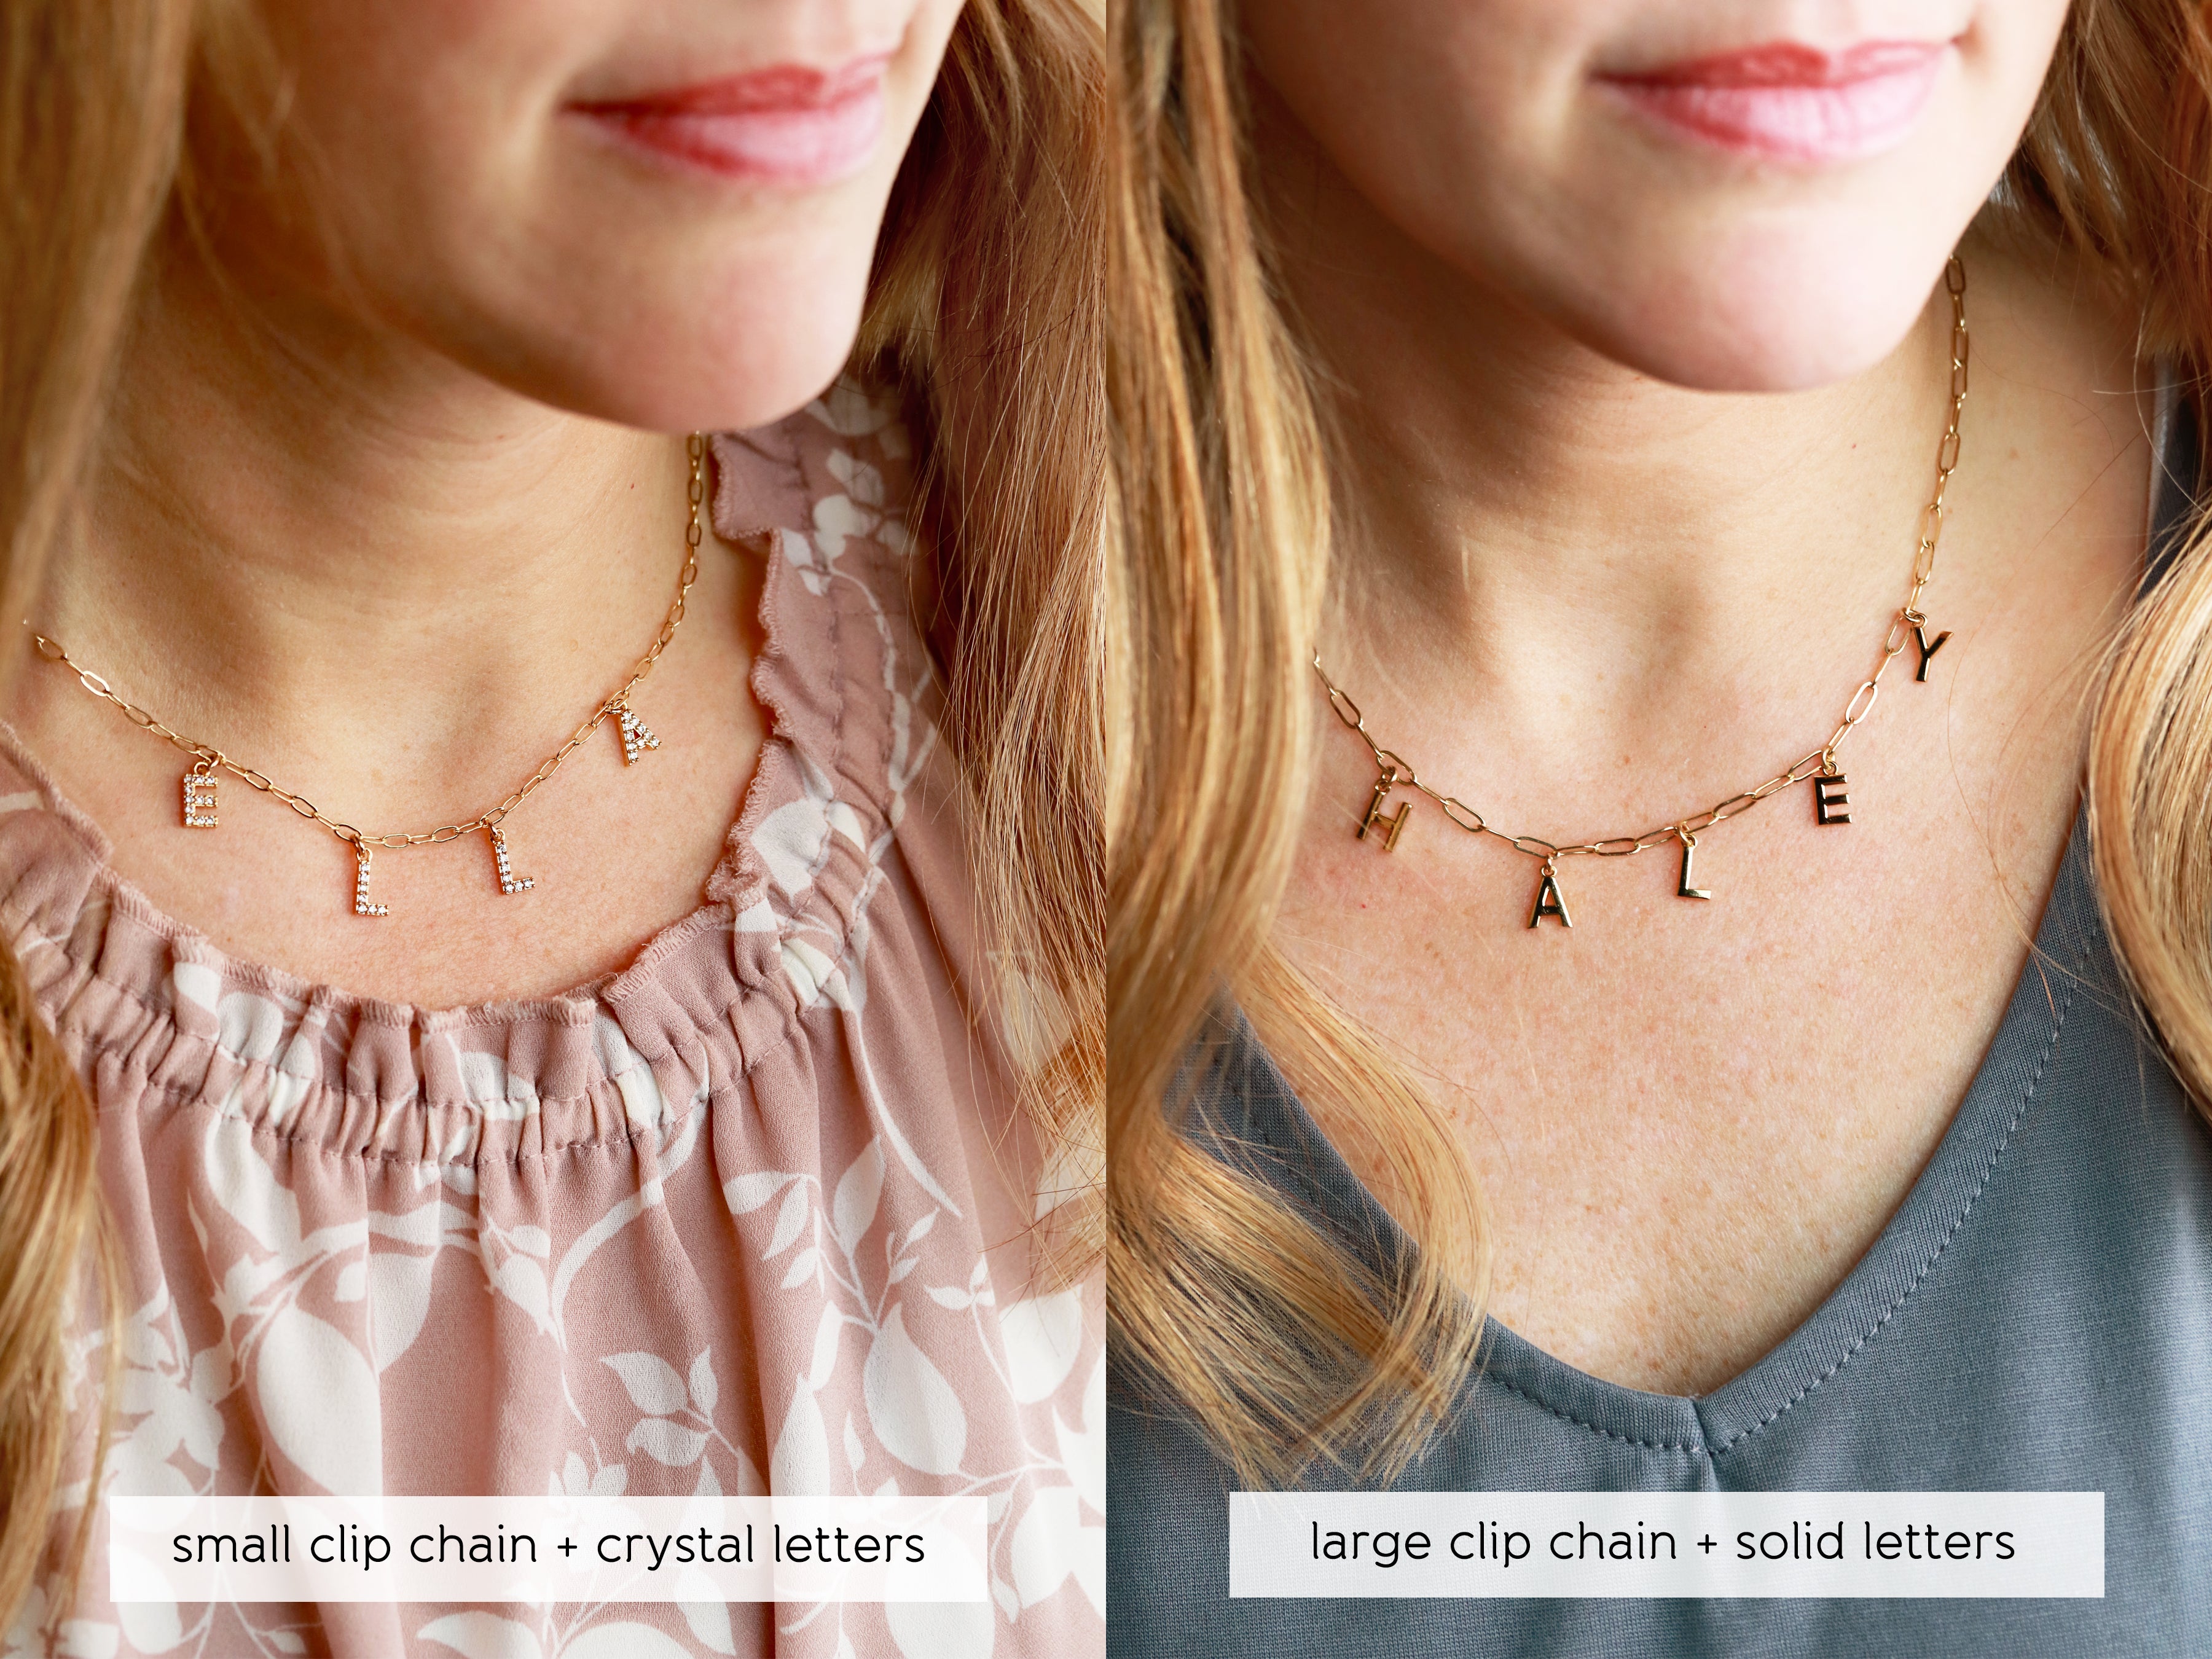 How To Make Your Own Body Chain and Where To Buy All The Supplies